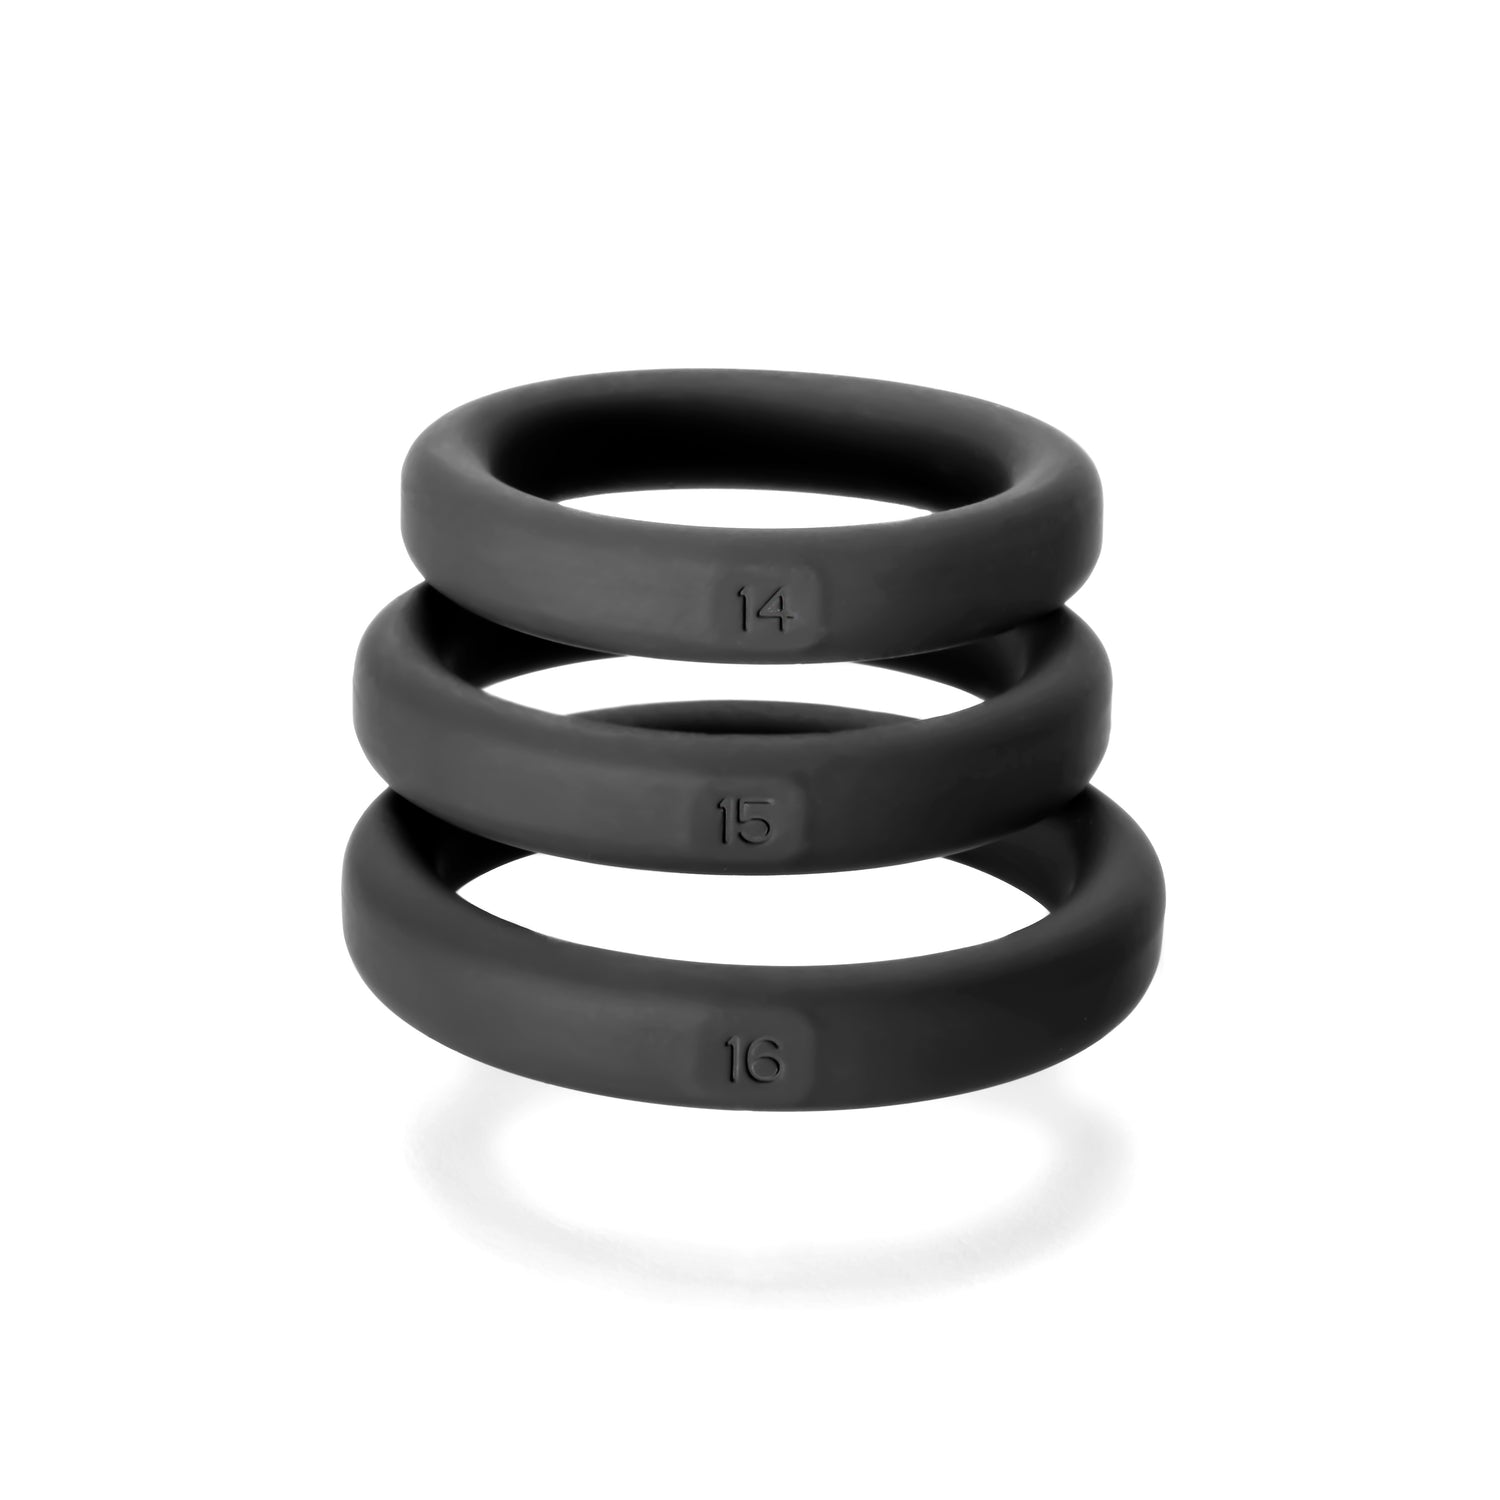 Xact-Fit Silicone Rings Medium 3 Ring Kit - Just for you desires